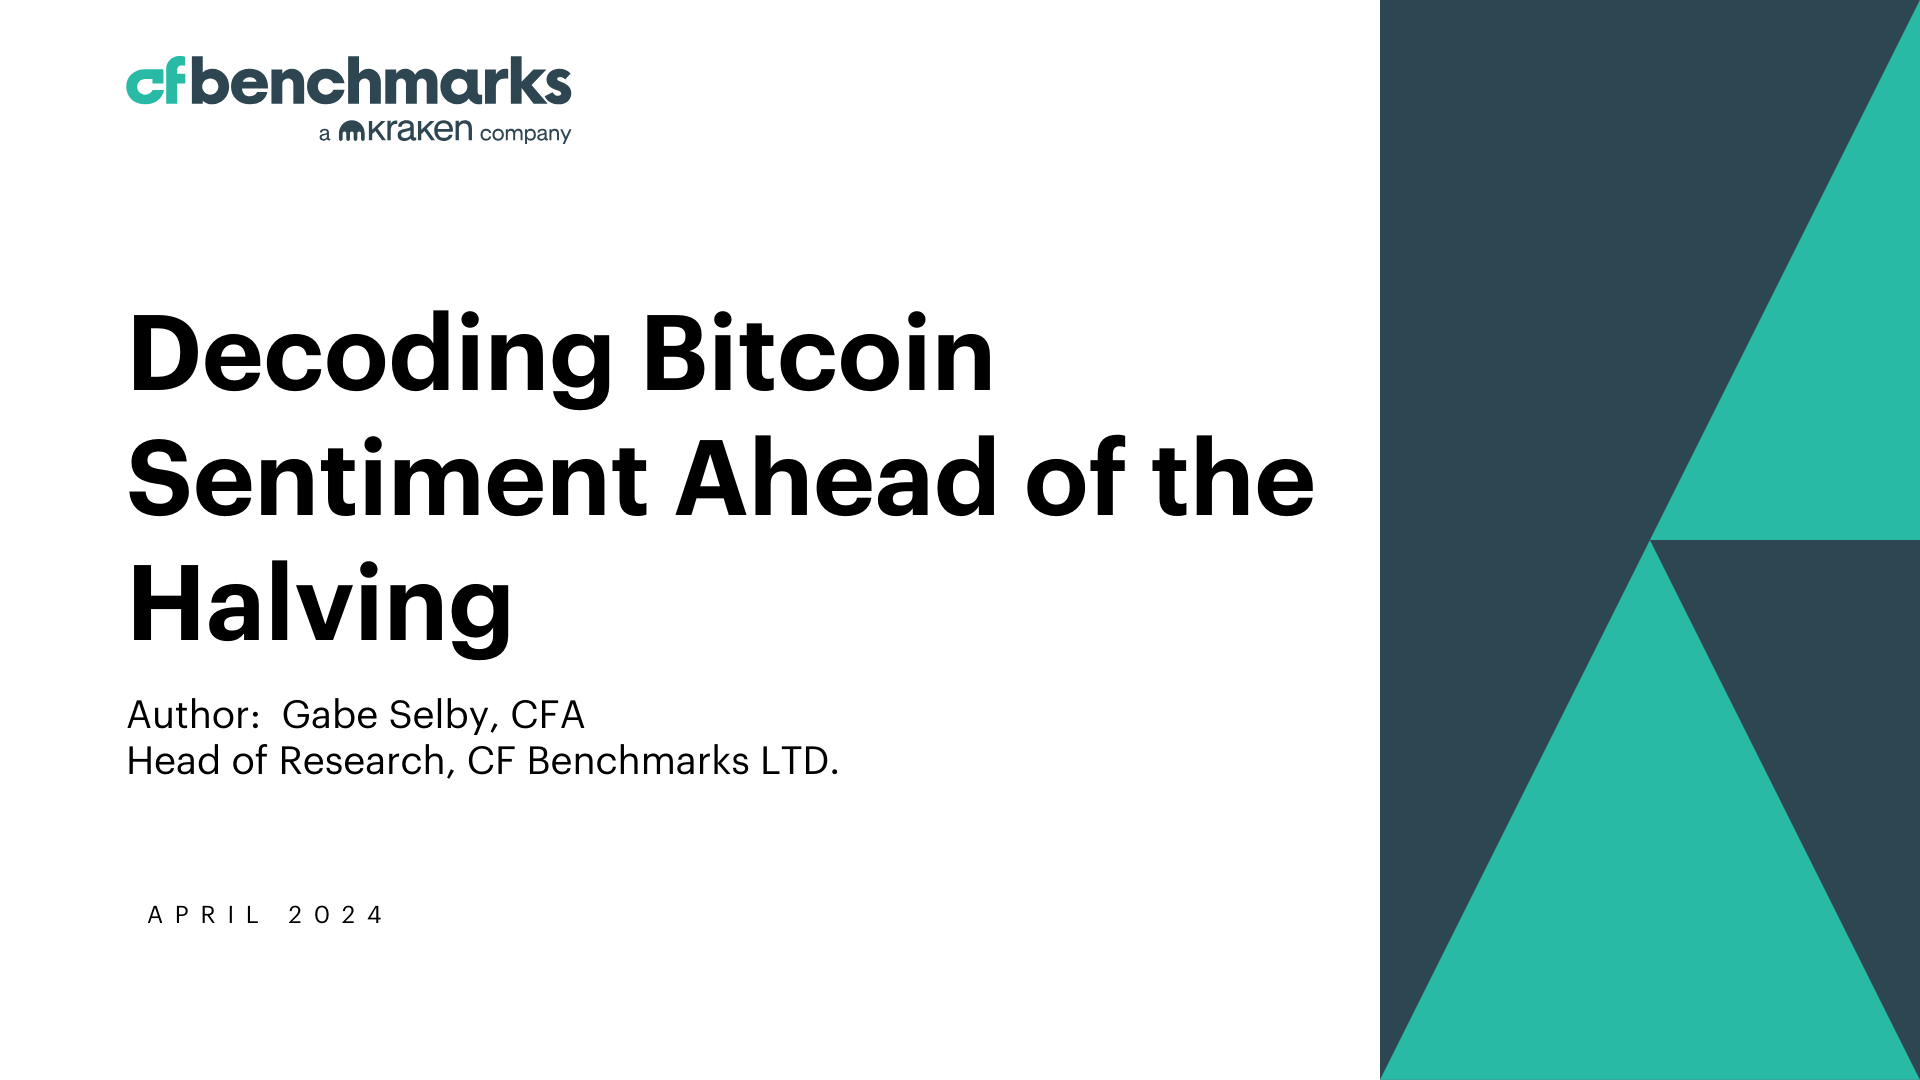 Decoding Bitcoin Sentiment Ahead of the Halving